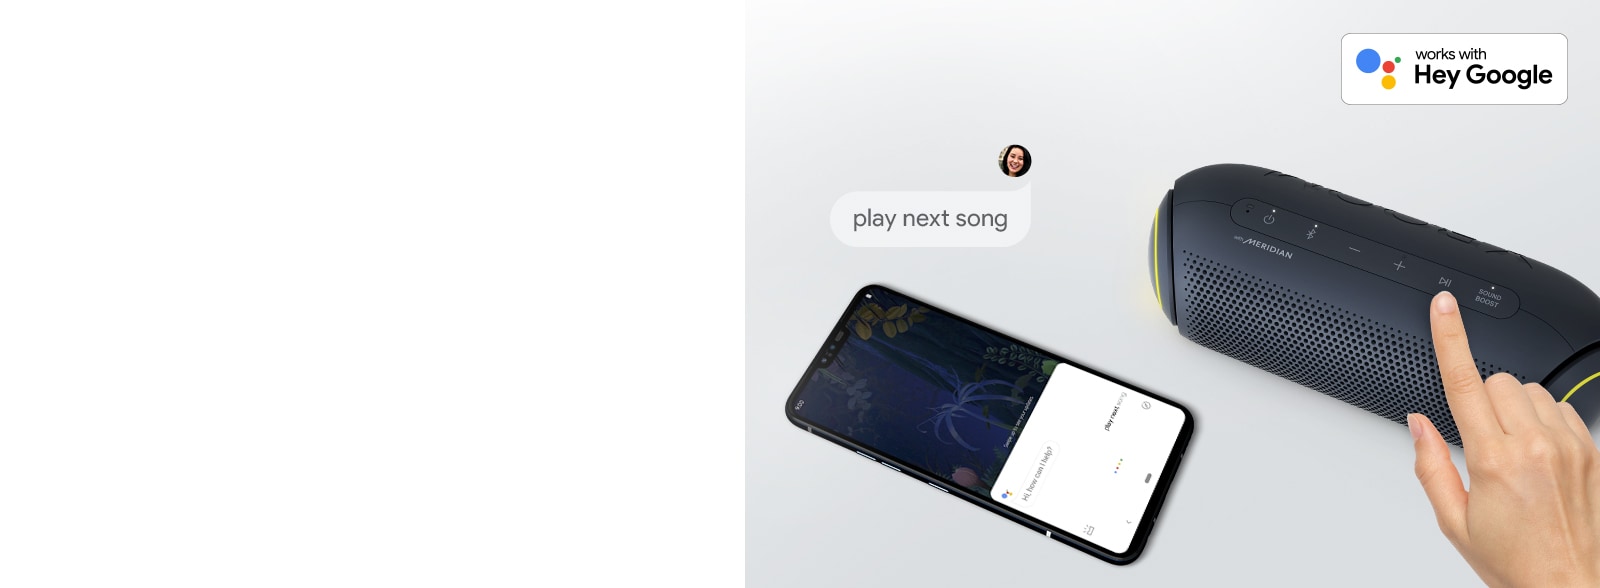 A hand presses a button on LG XBOOM Go. A smartphone is next it. There's a speech bubble. Google's logo is in the top right.